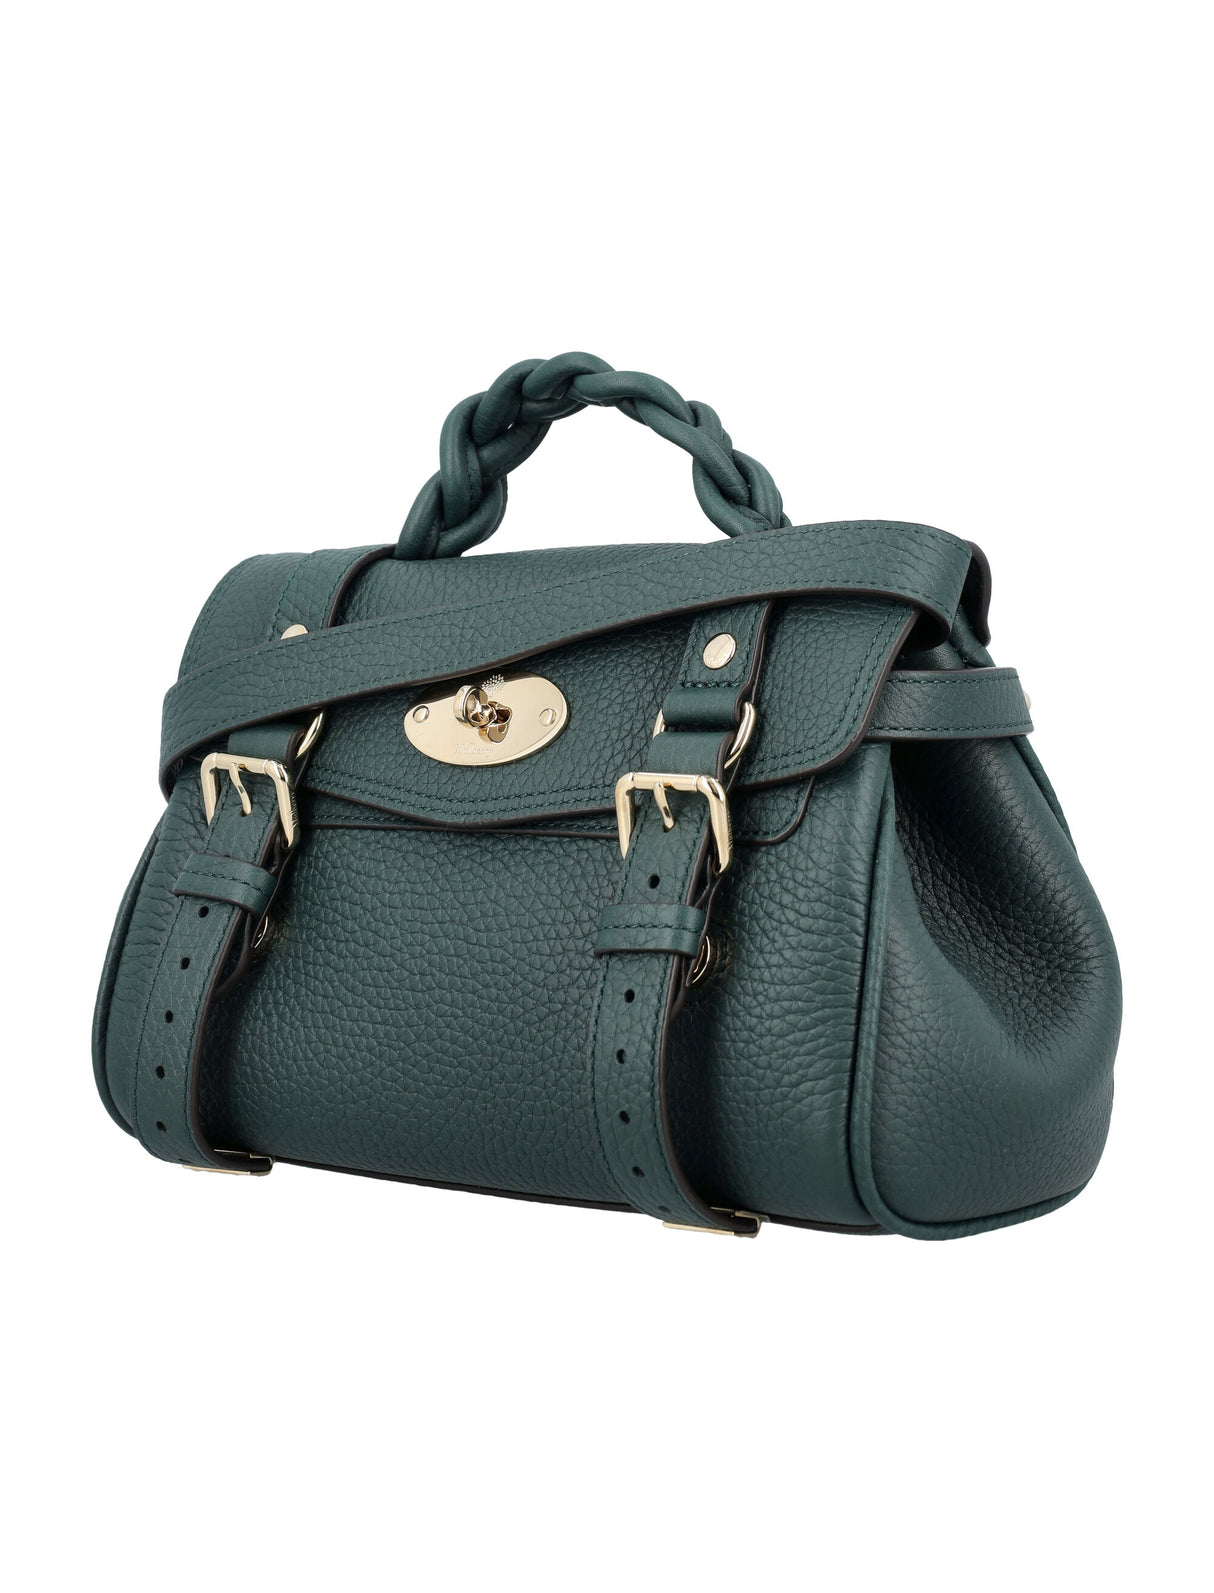 MULBERRY Mini Alexa Green Leather Shoulder Bag with Braided Handle and Postman's Lock